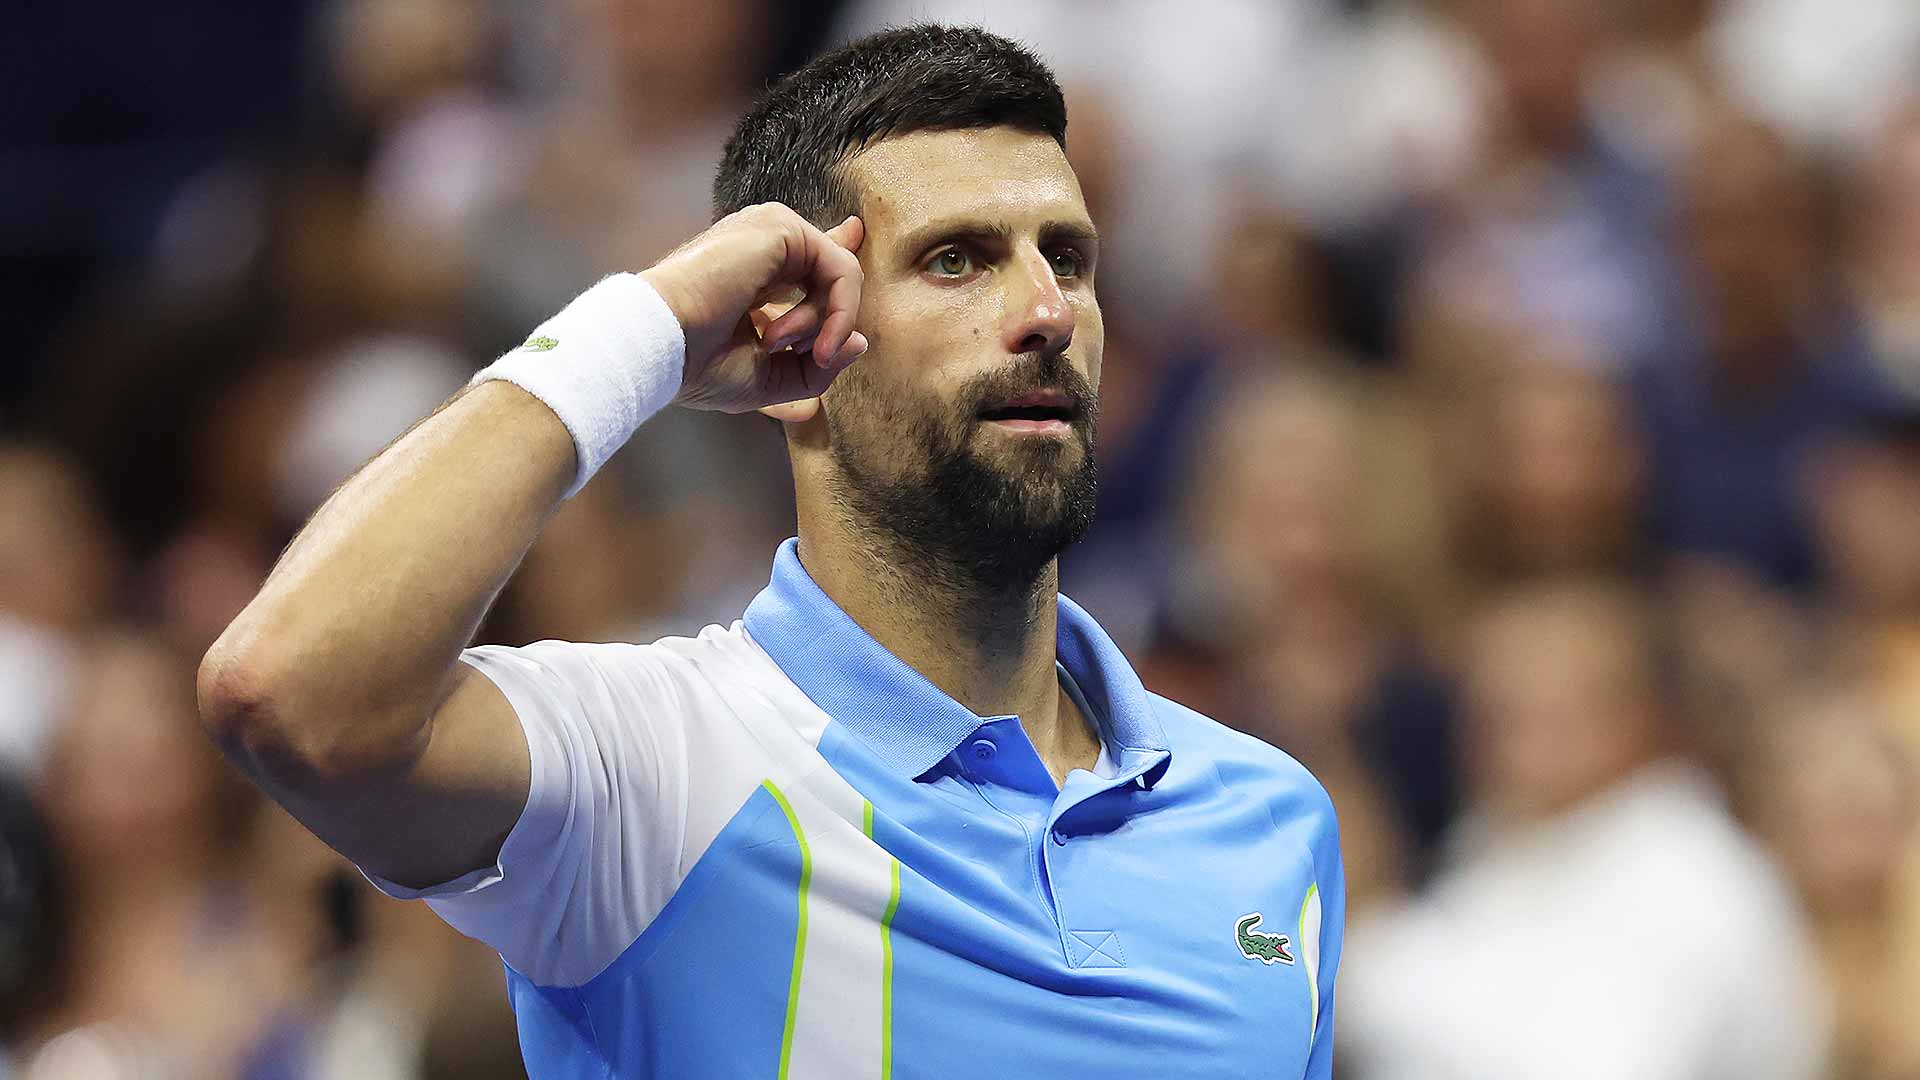 Novak Djokovic will play for a 24th major singles title on Sunday in the US Open final.